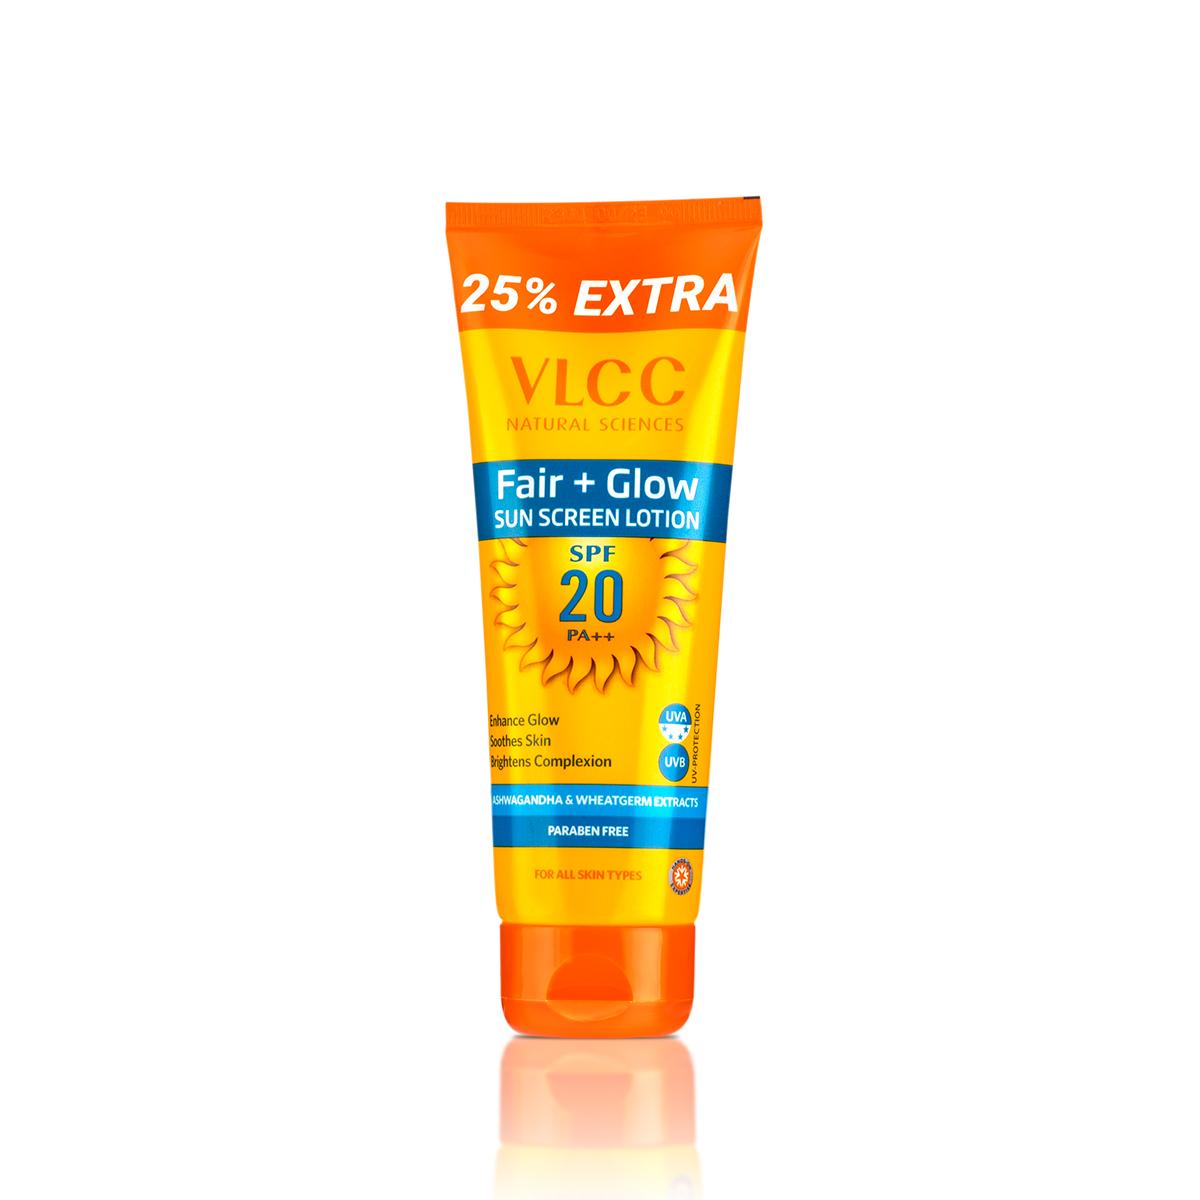 VLCC Fair+ Glow Sunscreen Lotion SPF20 PA++ - Enhance Your Skin's Fairness and Sun Protection